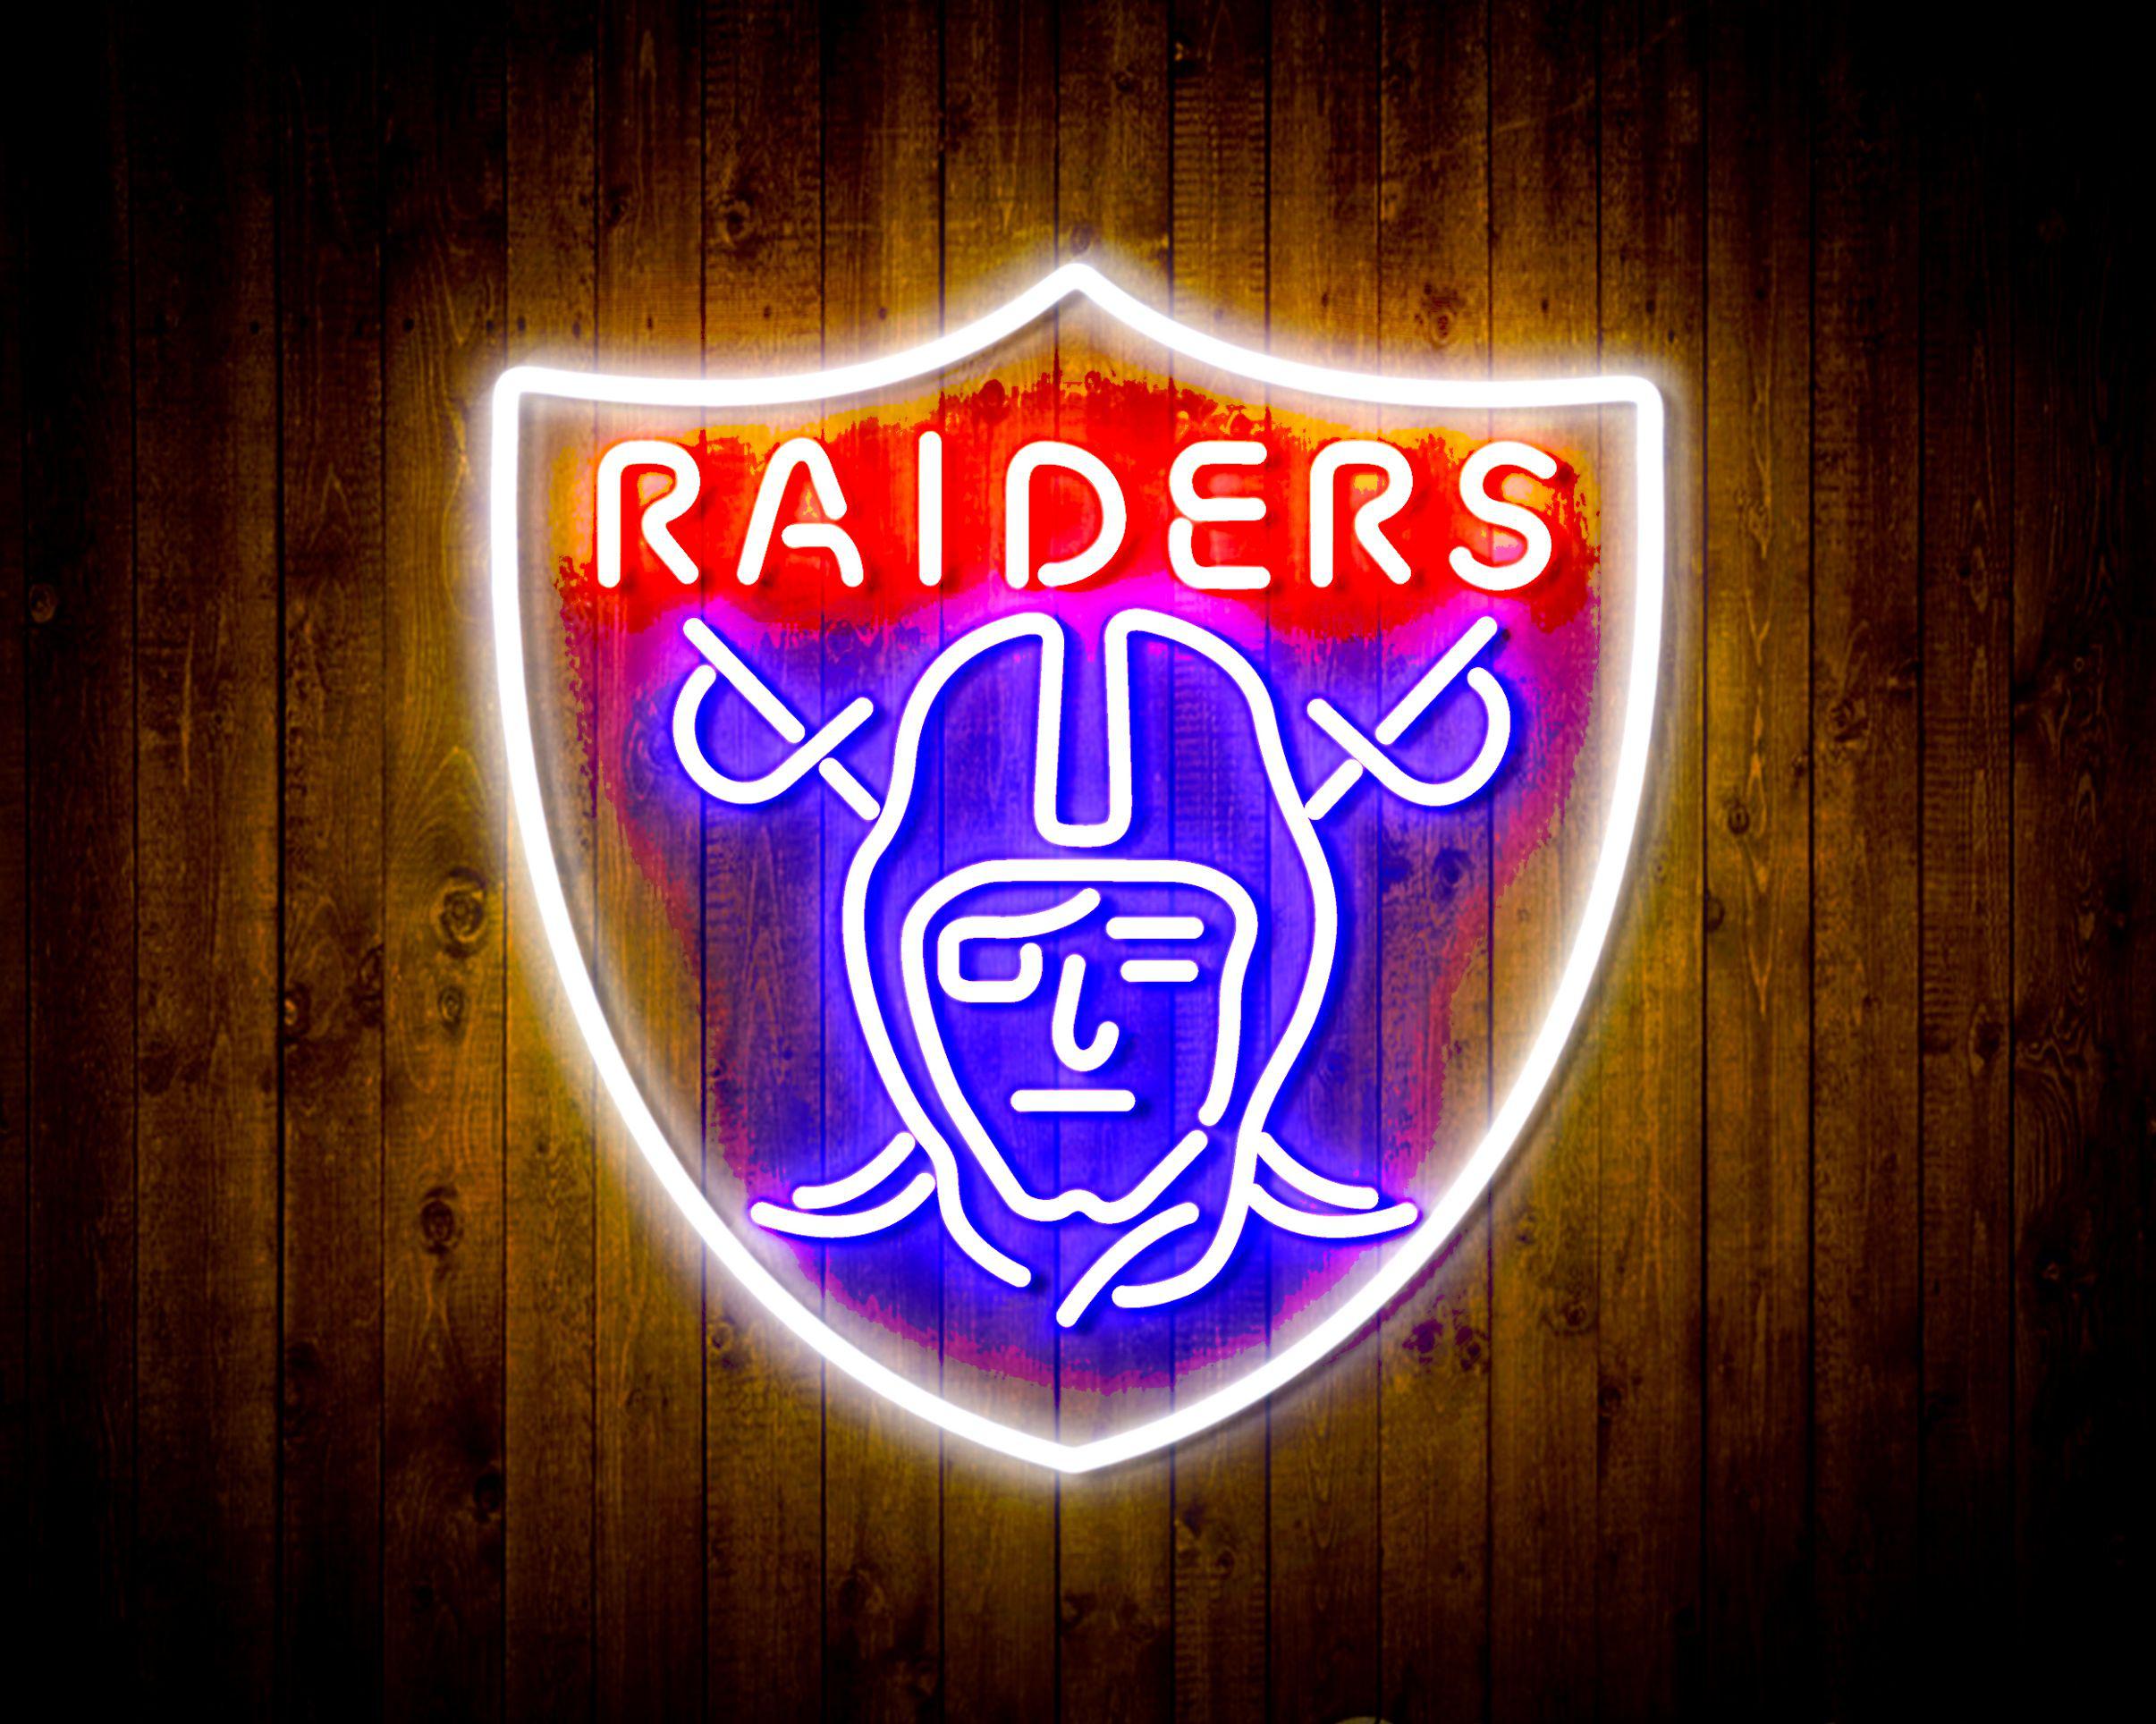 Raiders LED Neon Light Sign 8x12 for Sale in Las Vegas, NV